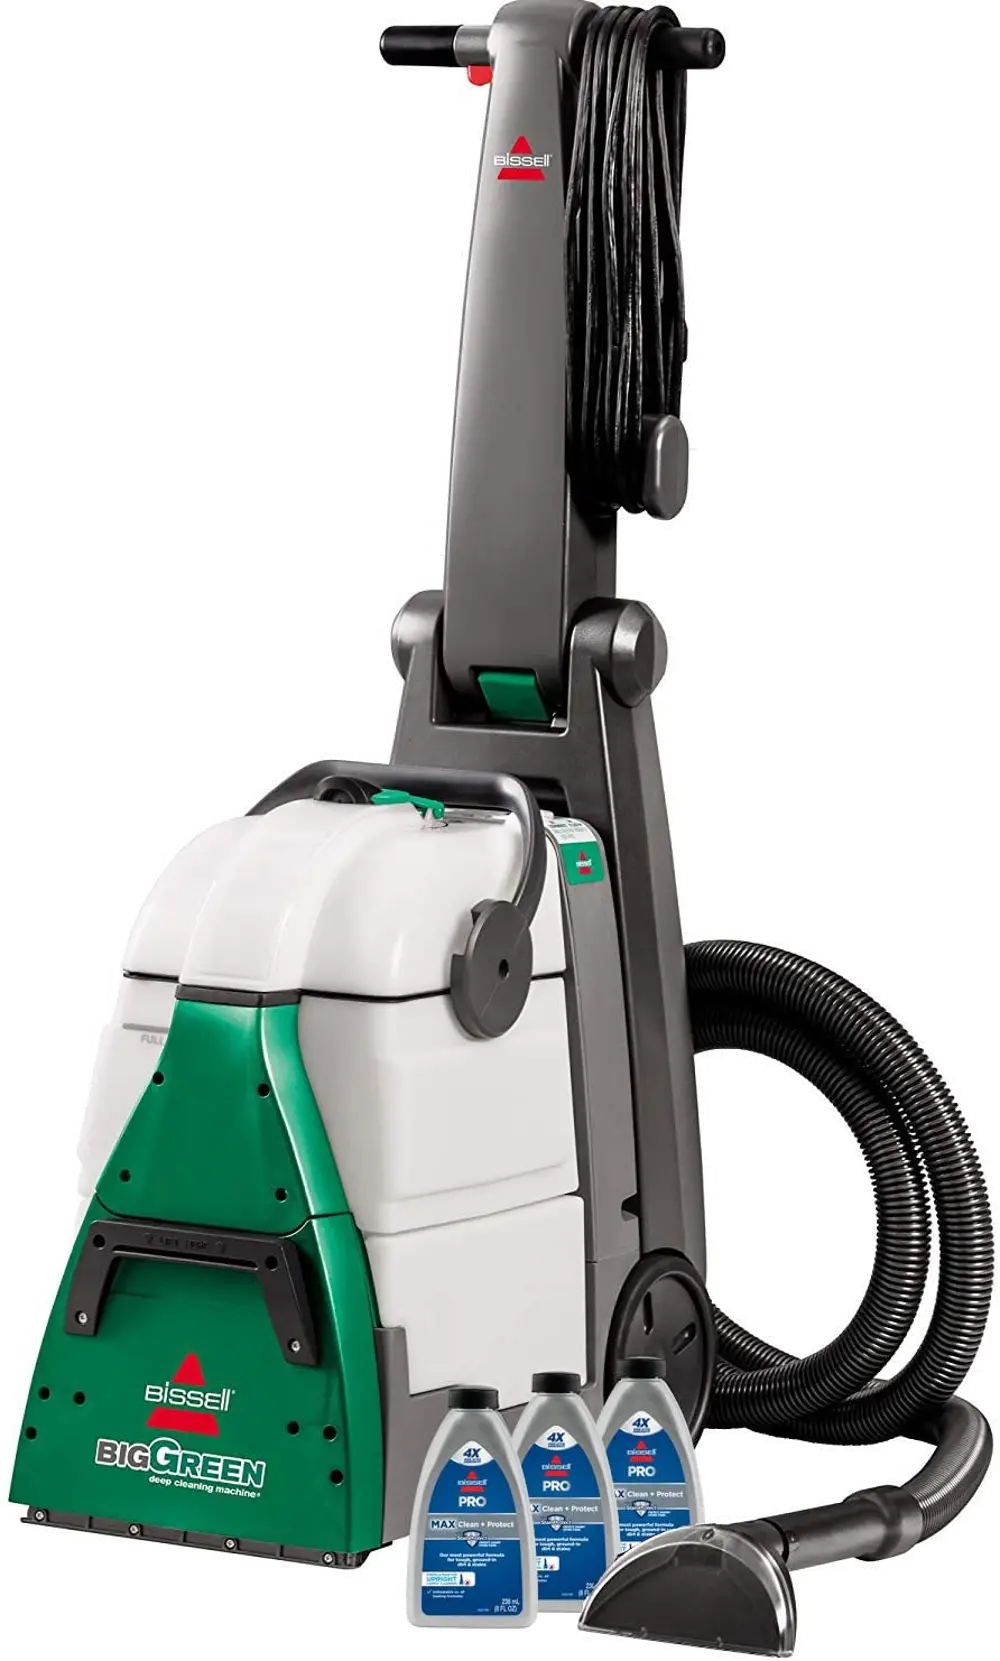 86T3 Bissell Big Green Cleaner-1